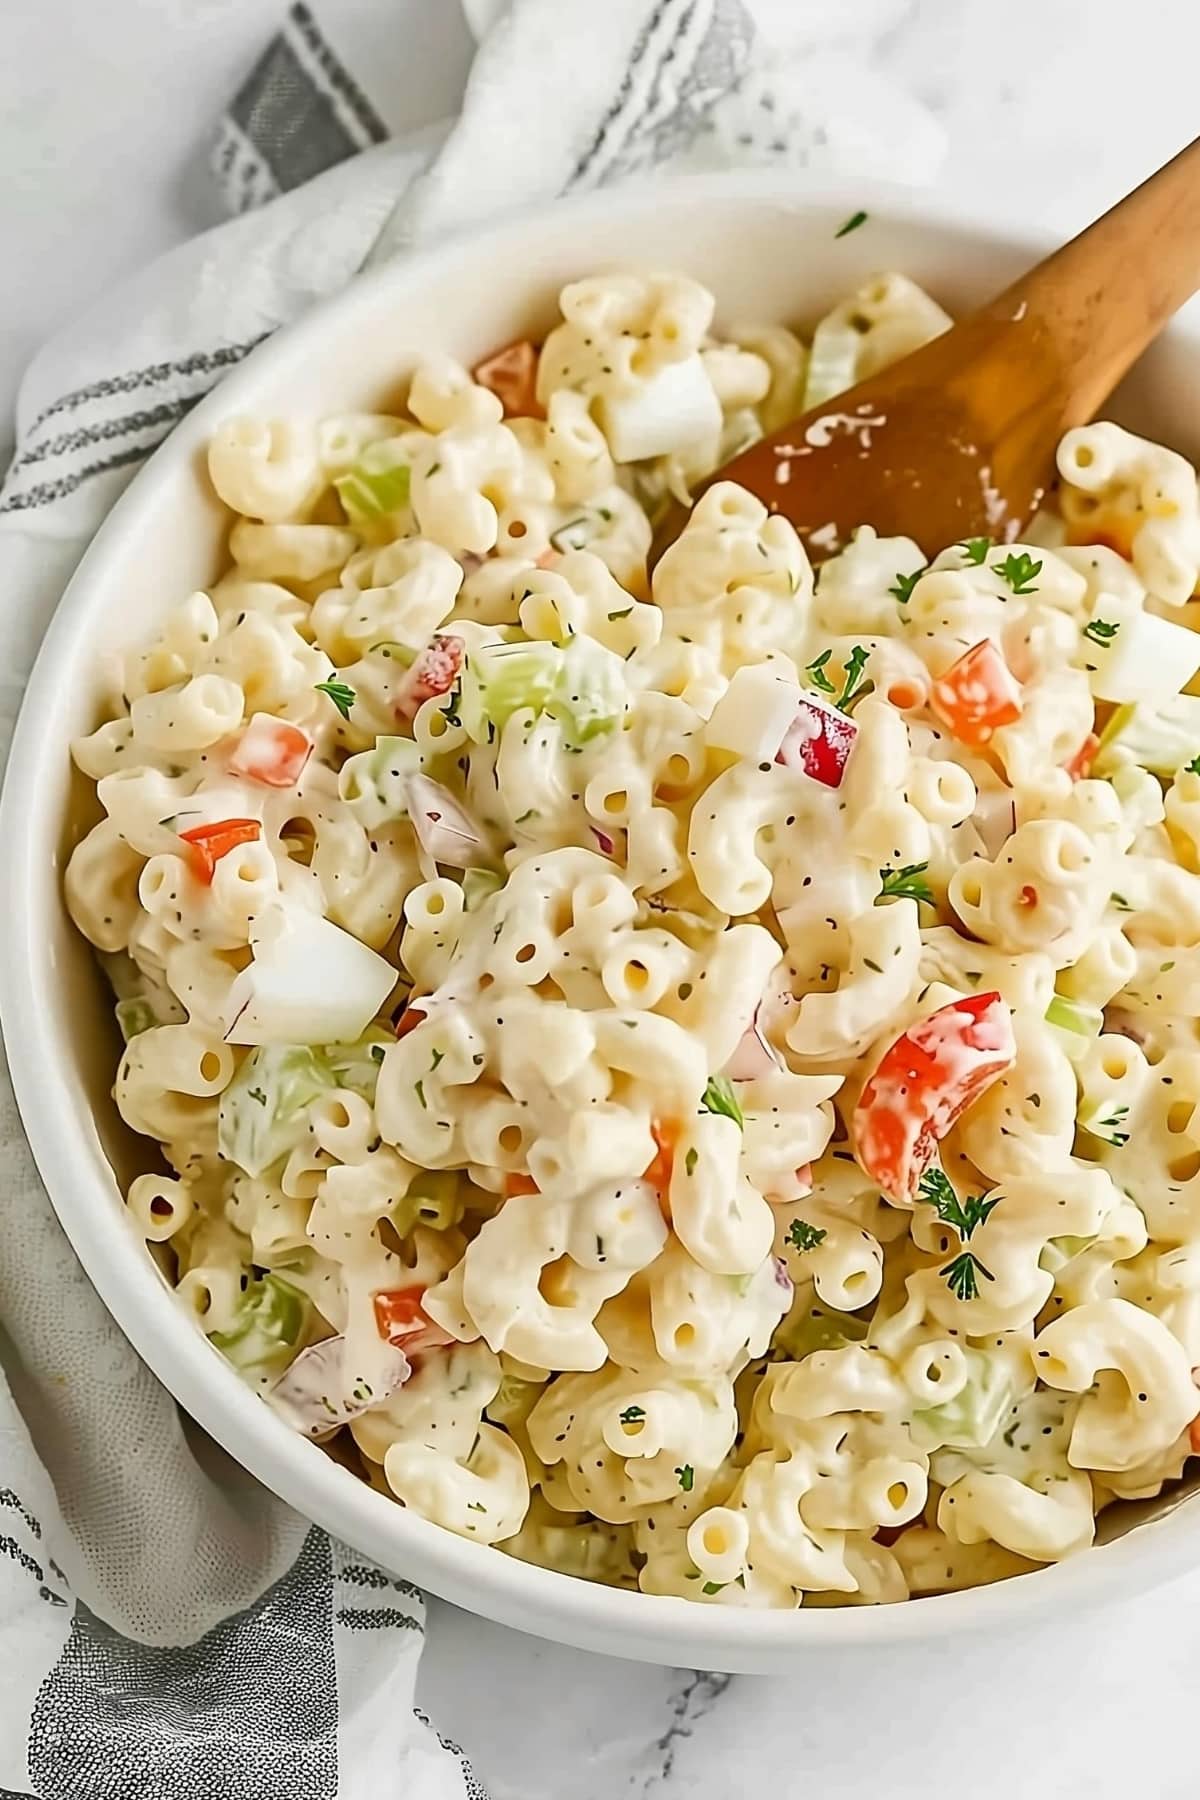 Macaroni salad tossed with a wooden spoon in a white bowl.